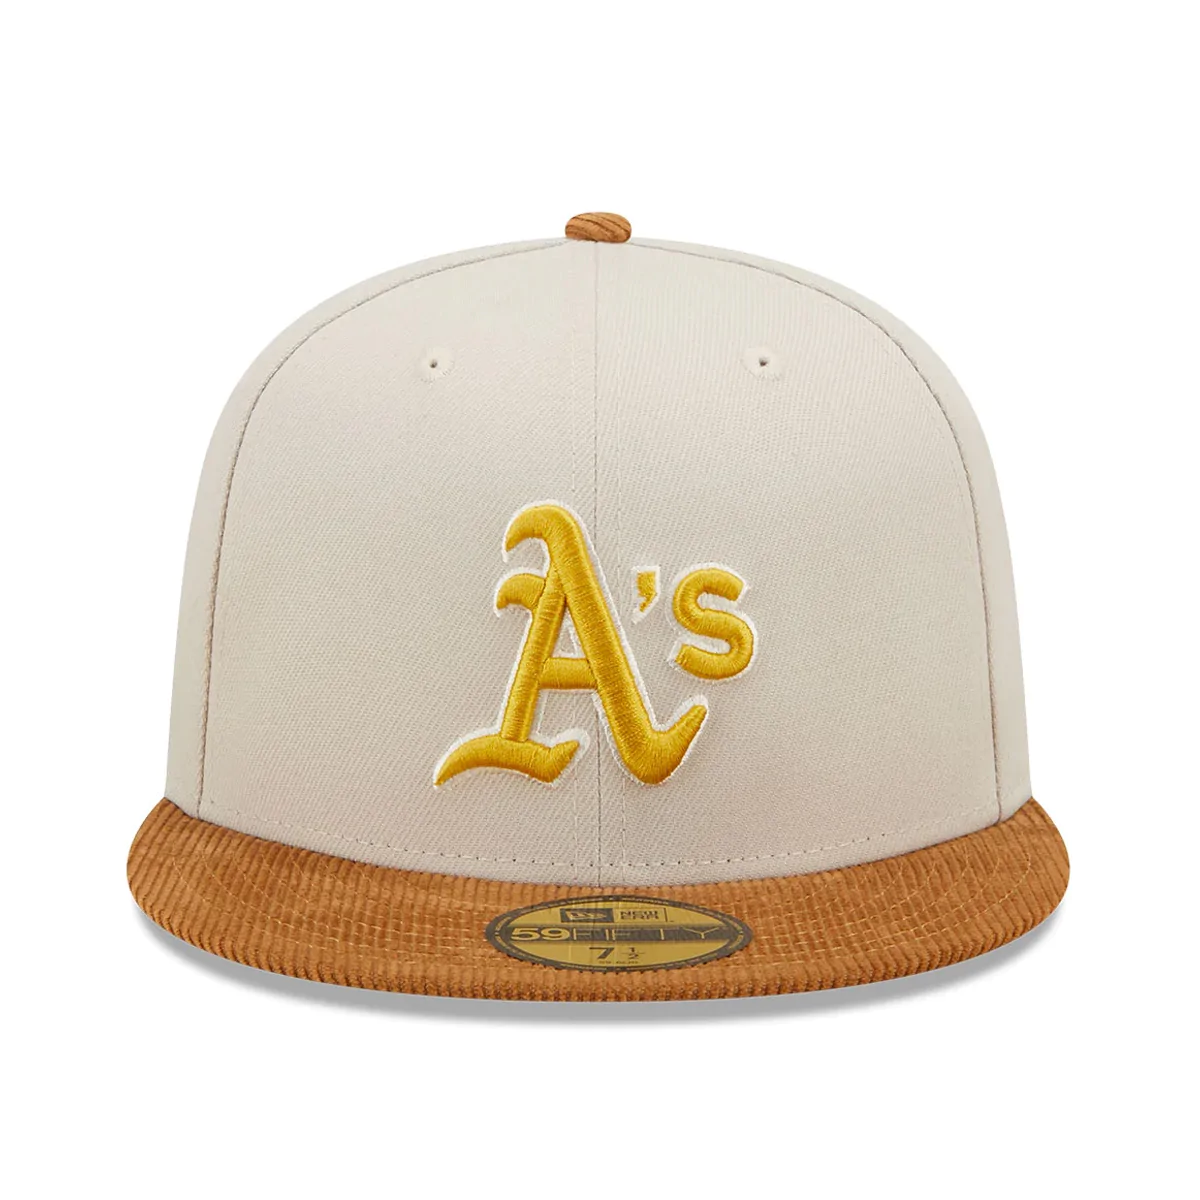 OAKLAND ATHLETICS CORD VISOR 59FIFTY FITTED HAT (CORDUROY BRIM)